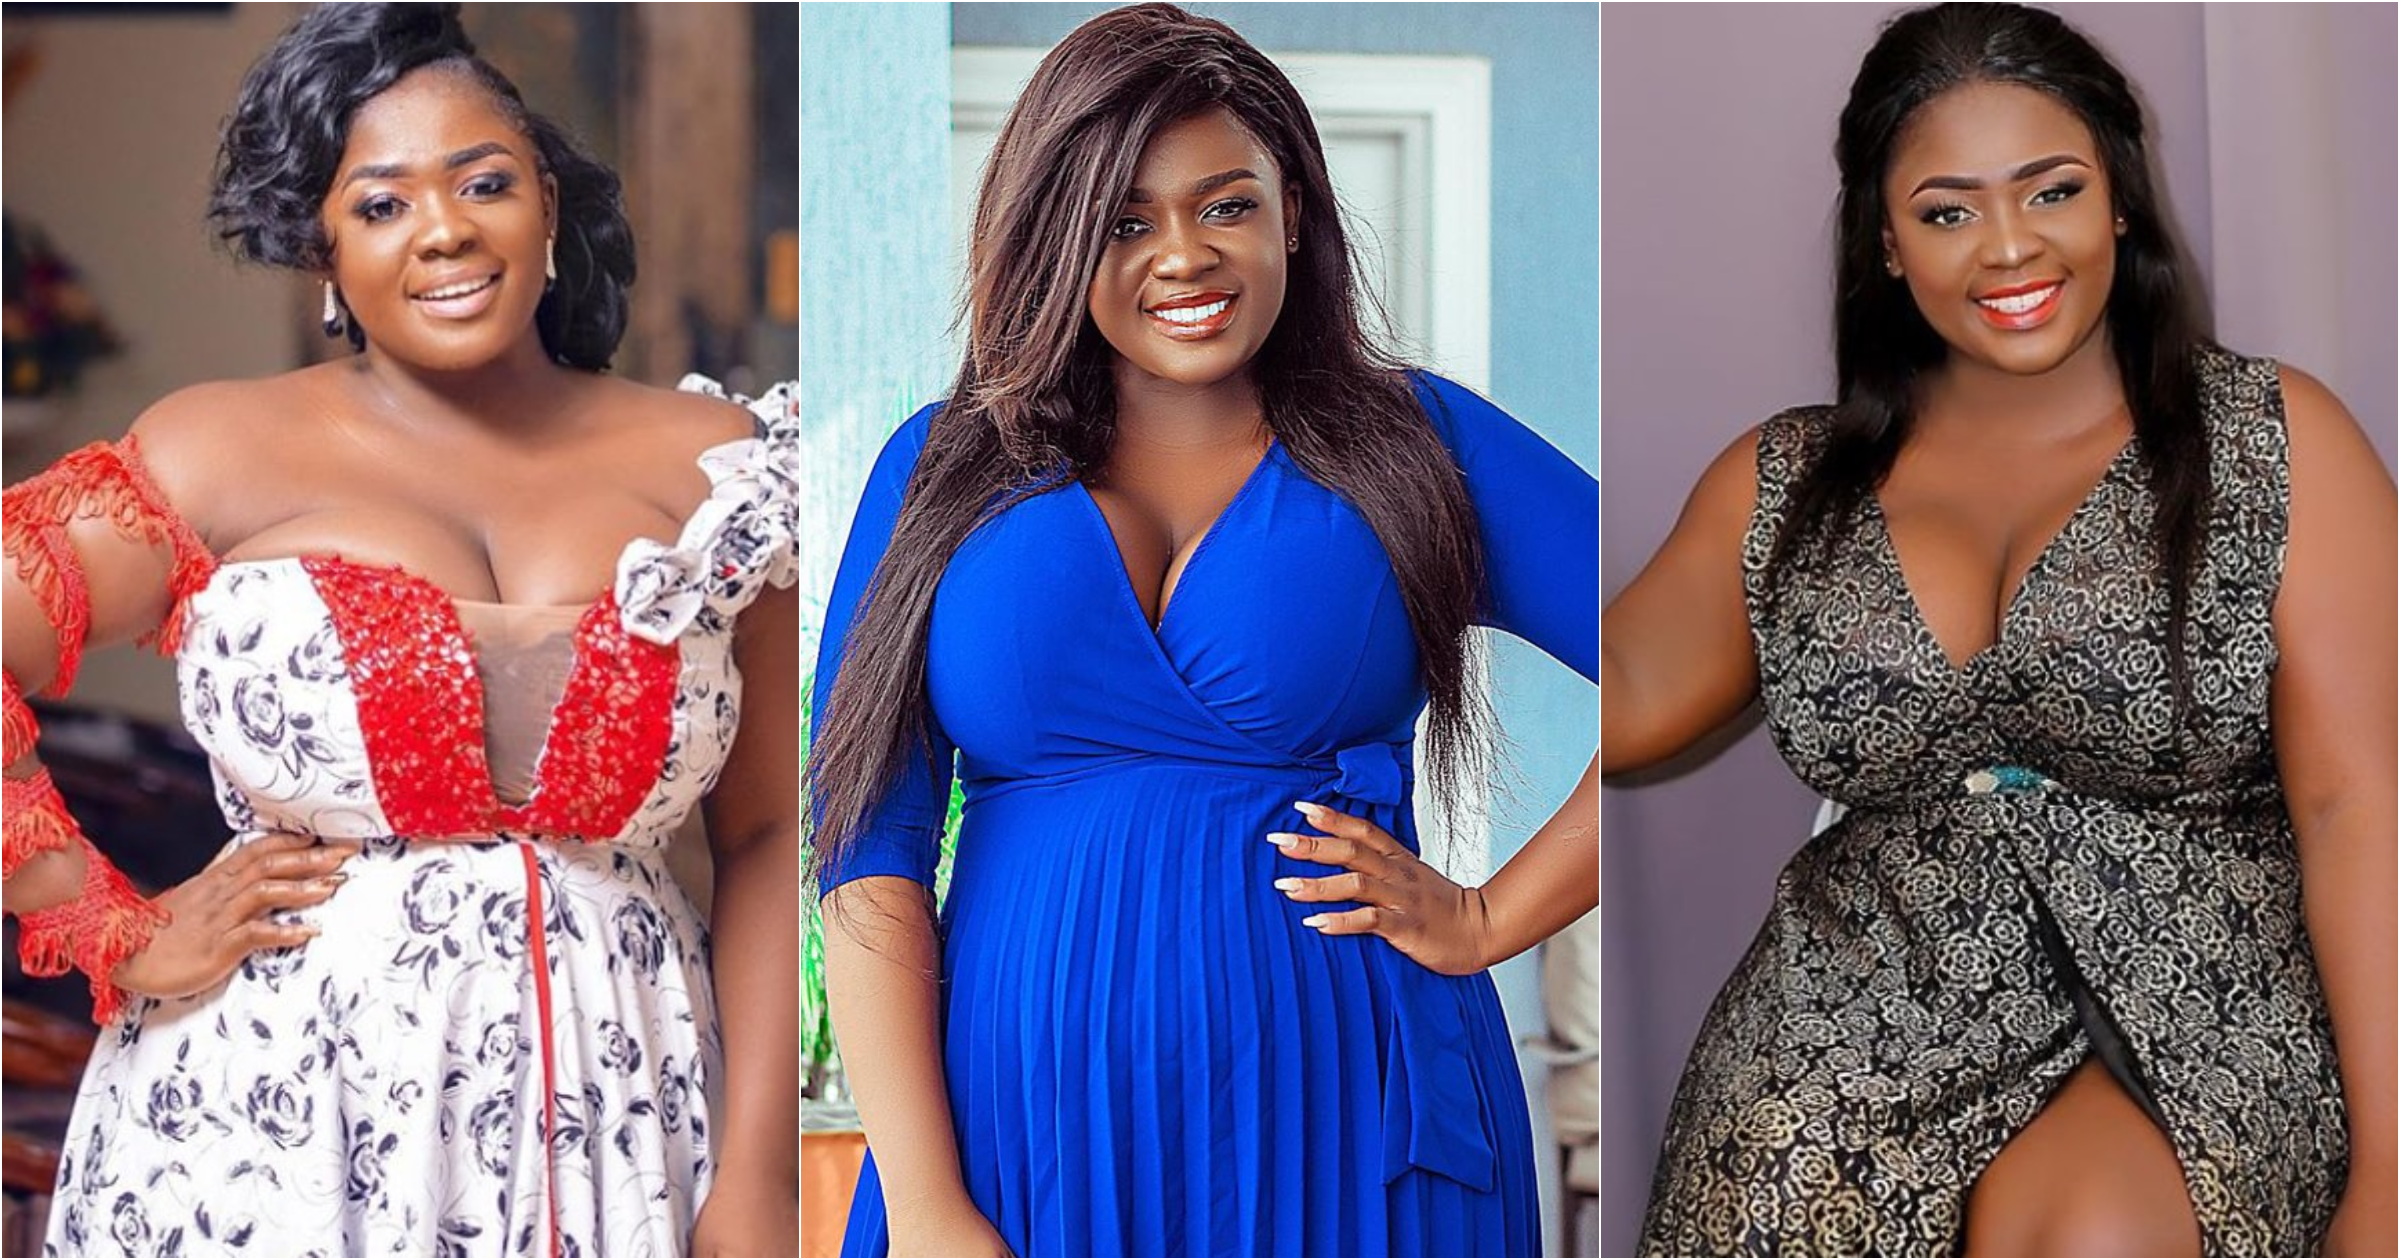 God is not done with me yet - Tracey Boakye says amid Papa No saga